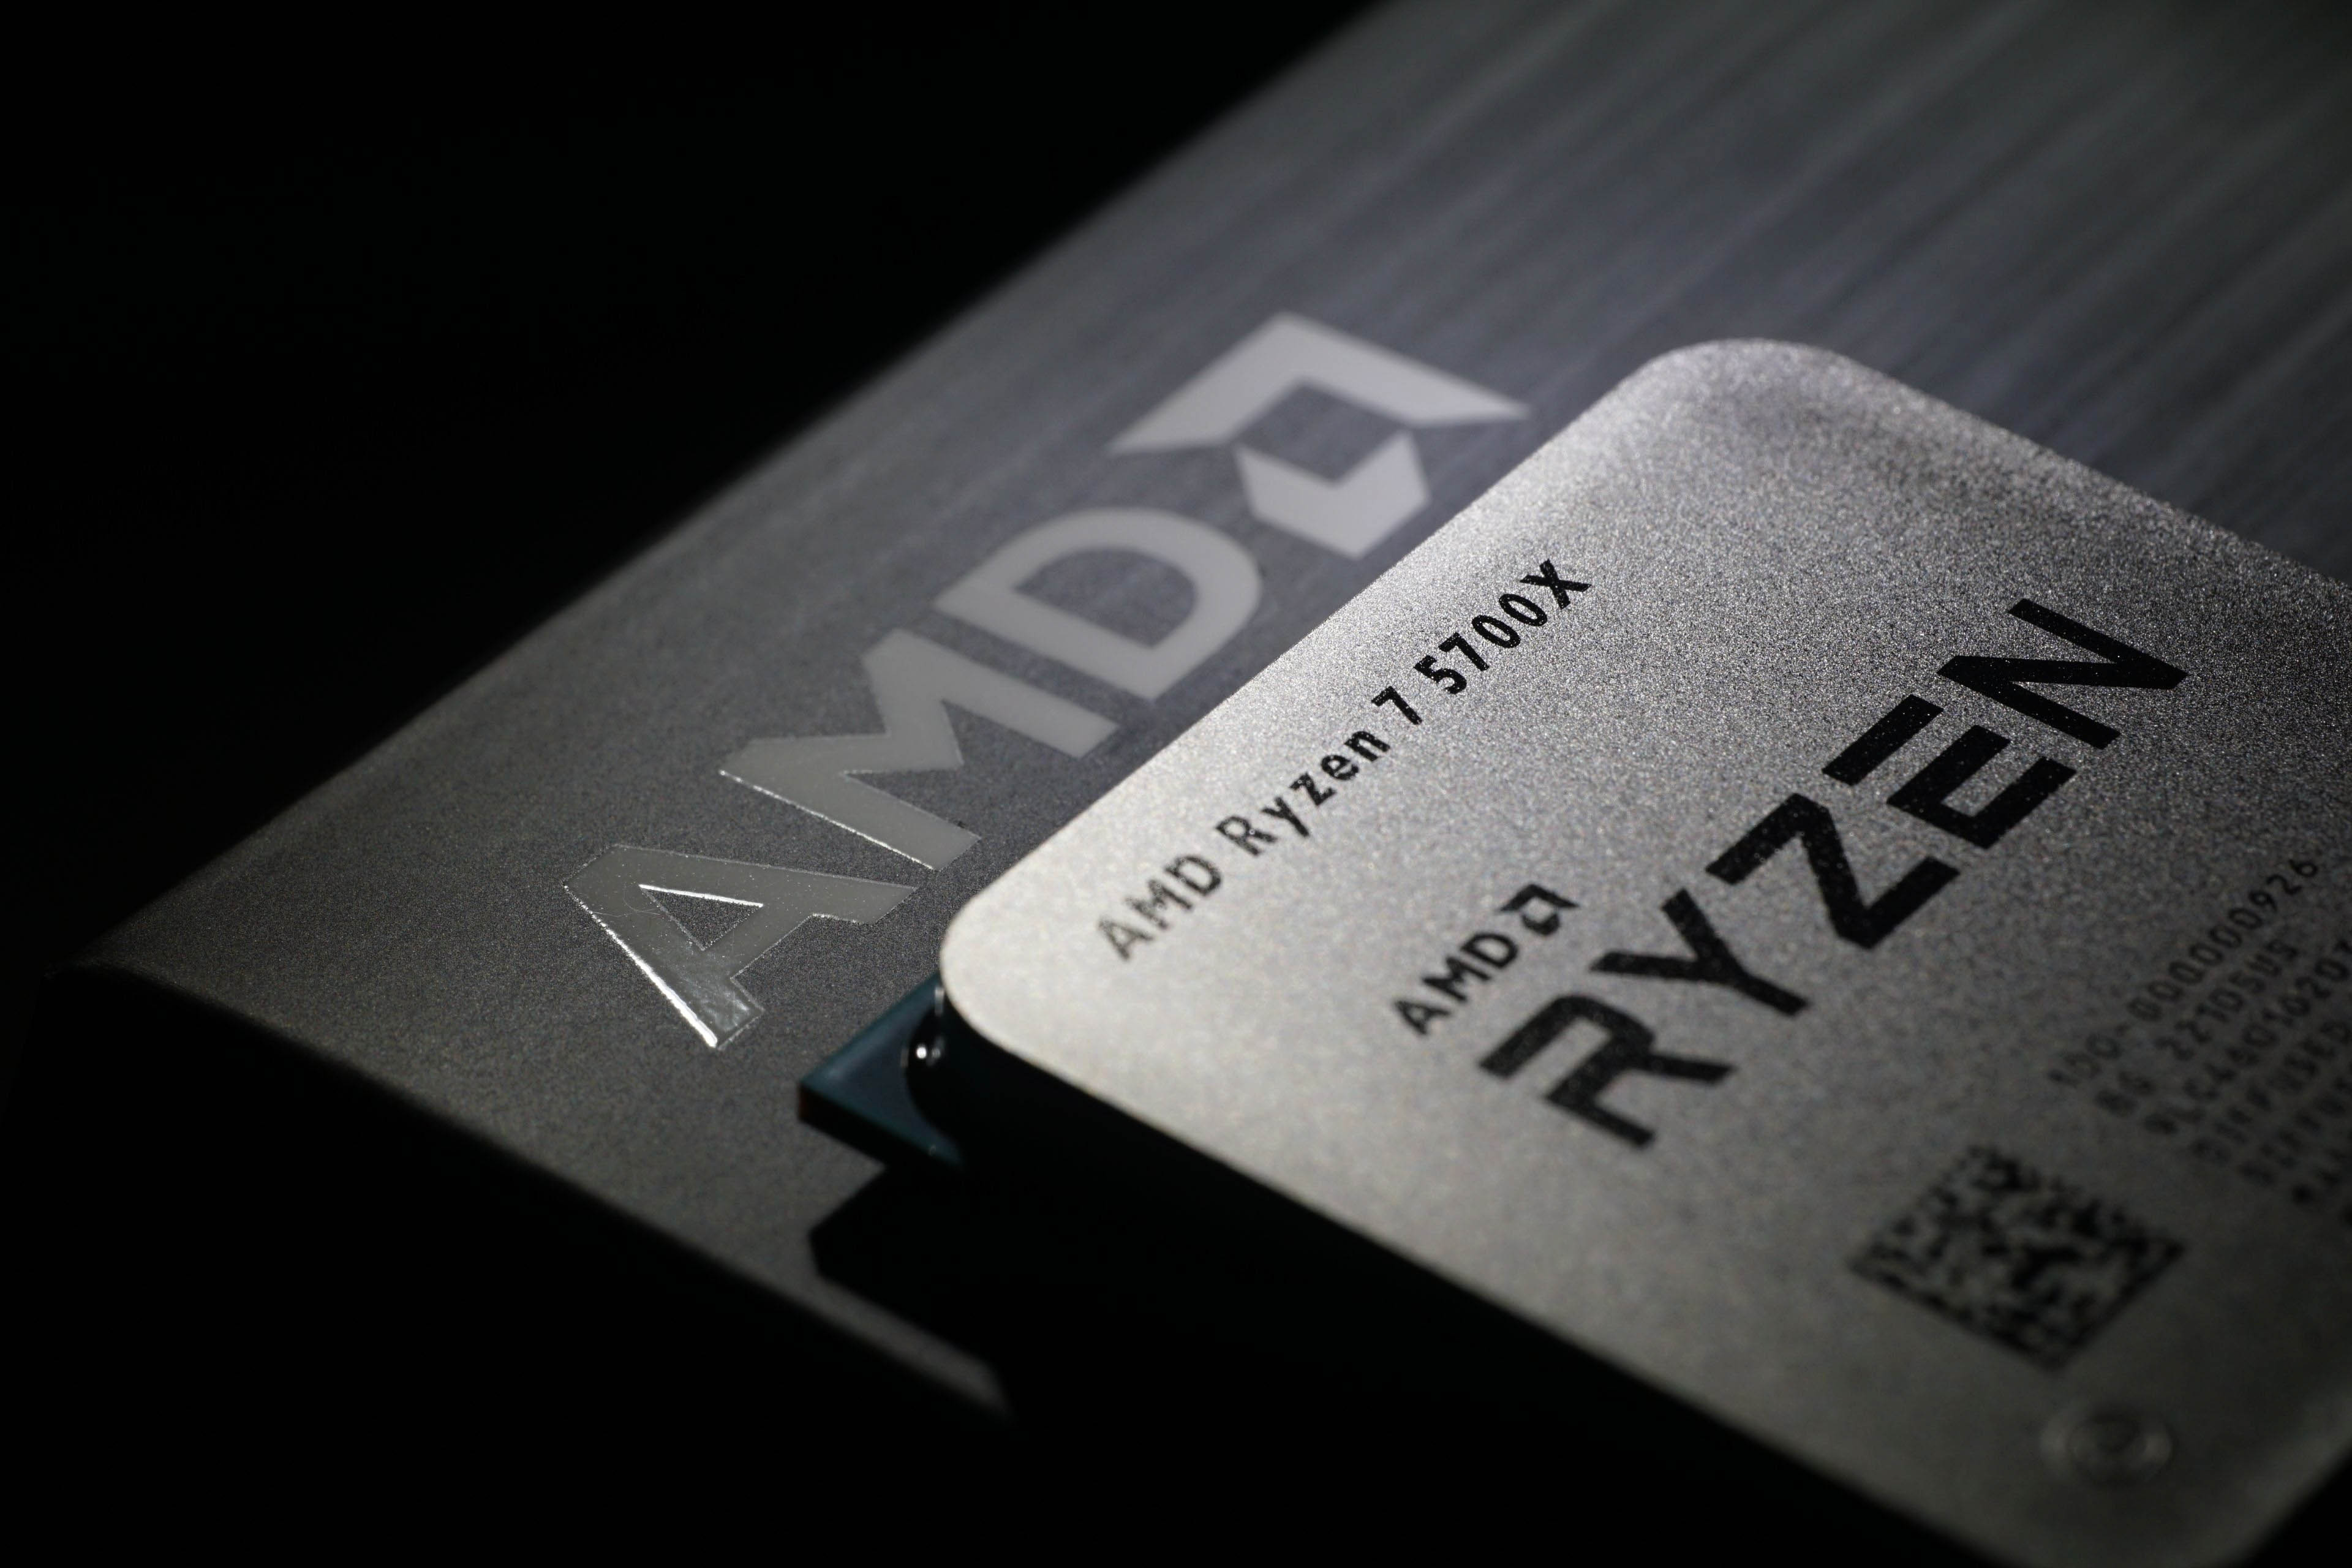 Best Cooling Solutions for the AMD Ryzen 7 5800X 3D CPU: Our 5  Recommendation 